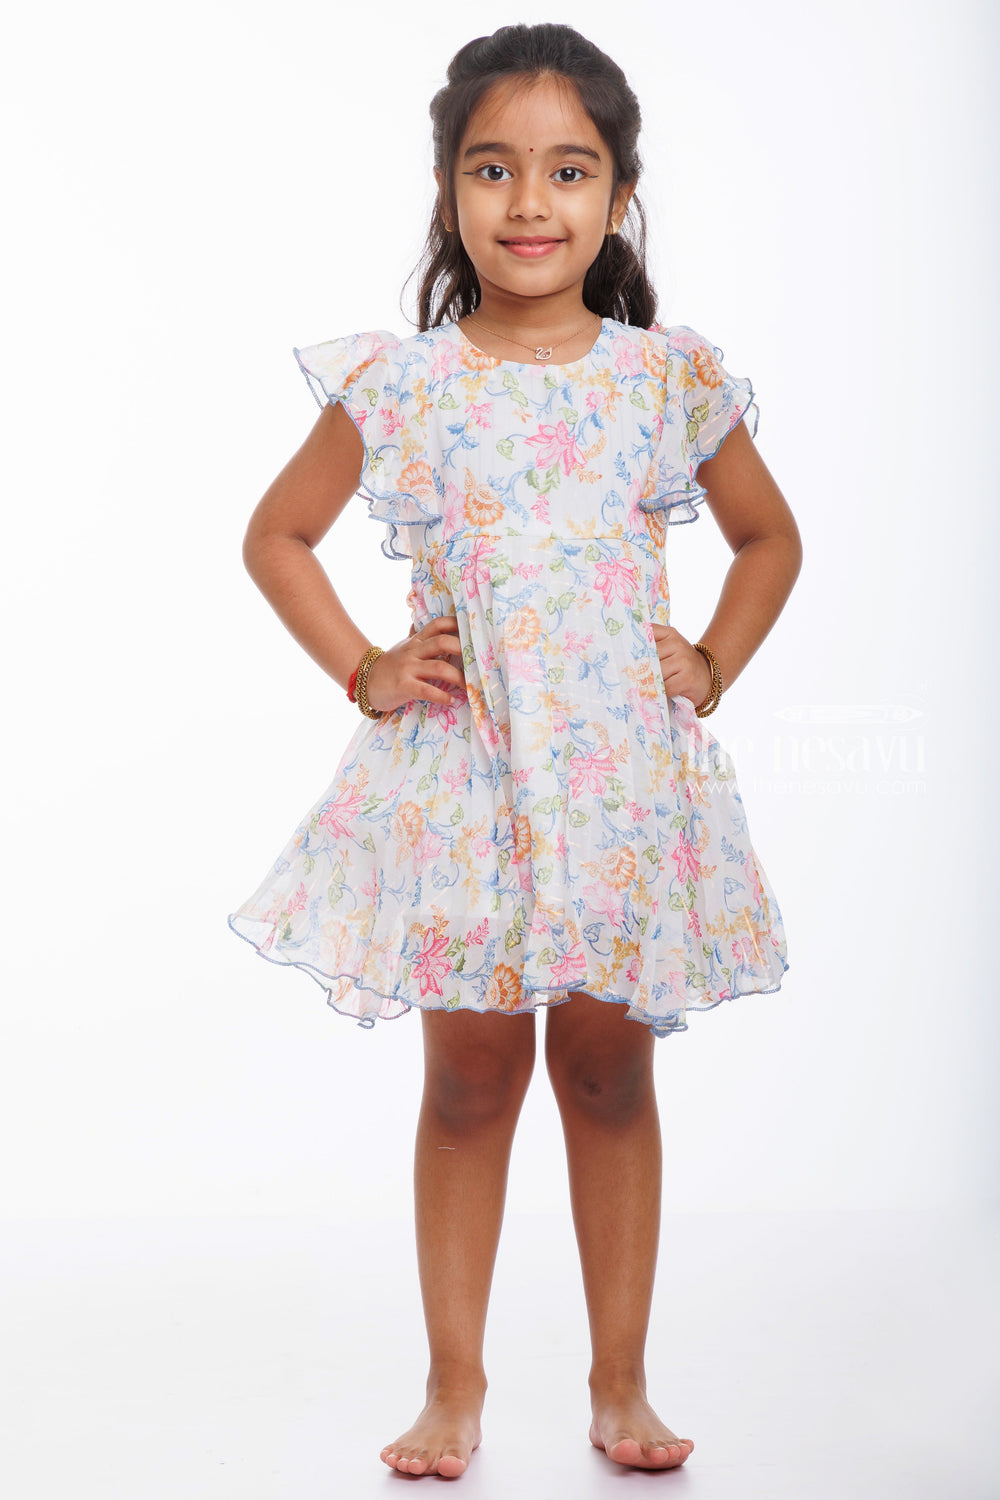 The Nesavu Baby Fancy Frock Baby Girl's Angelic Floral Frock with Flutter Sleeves Nesavu Charming Floral Dress for Baby Girls | Perfect for Celebrations and Play | The Nesavu